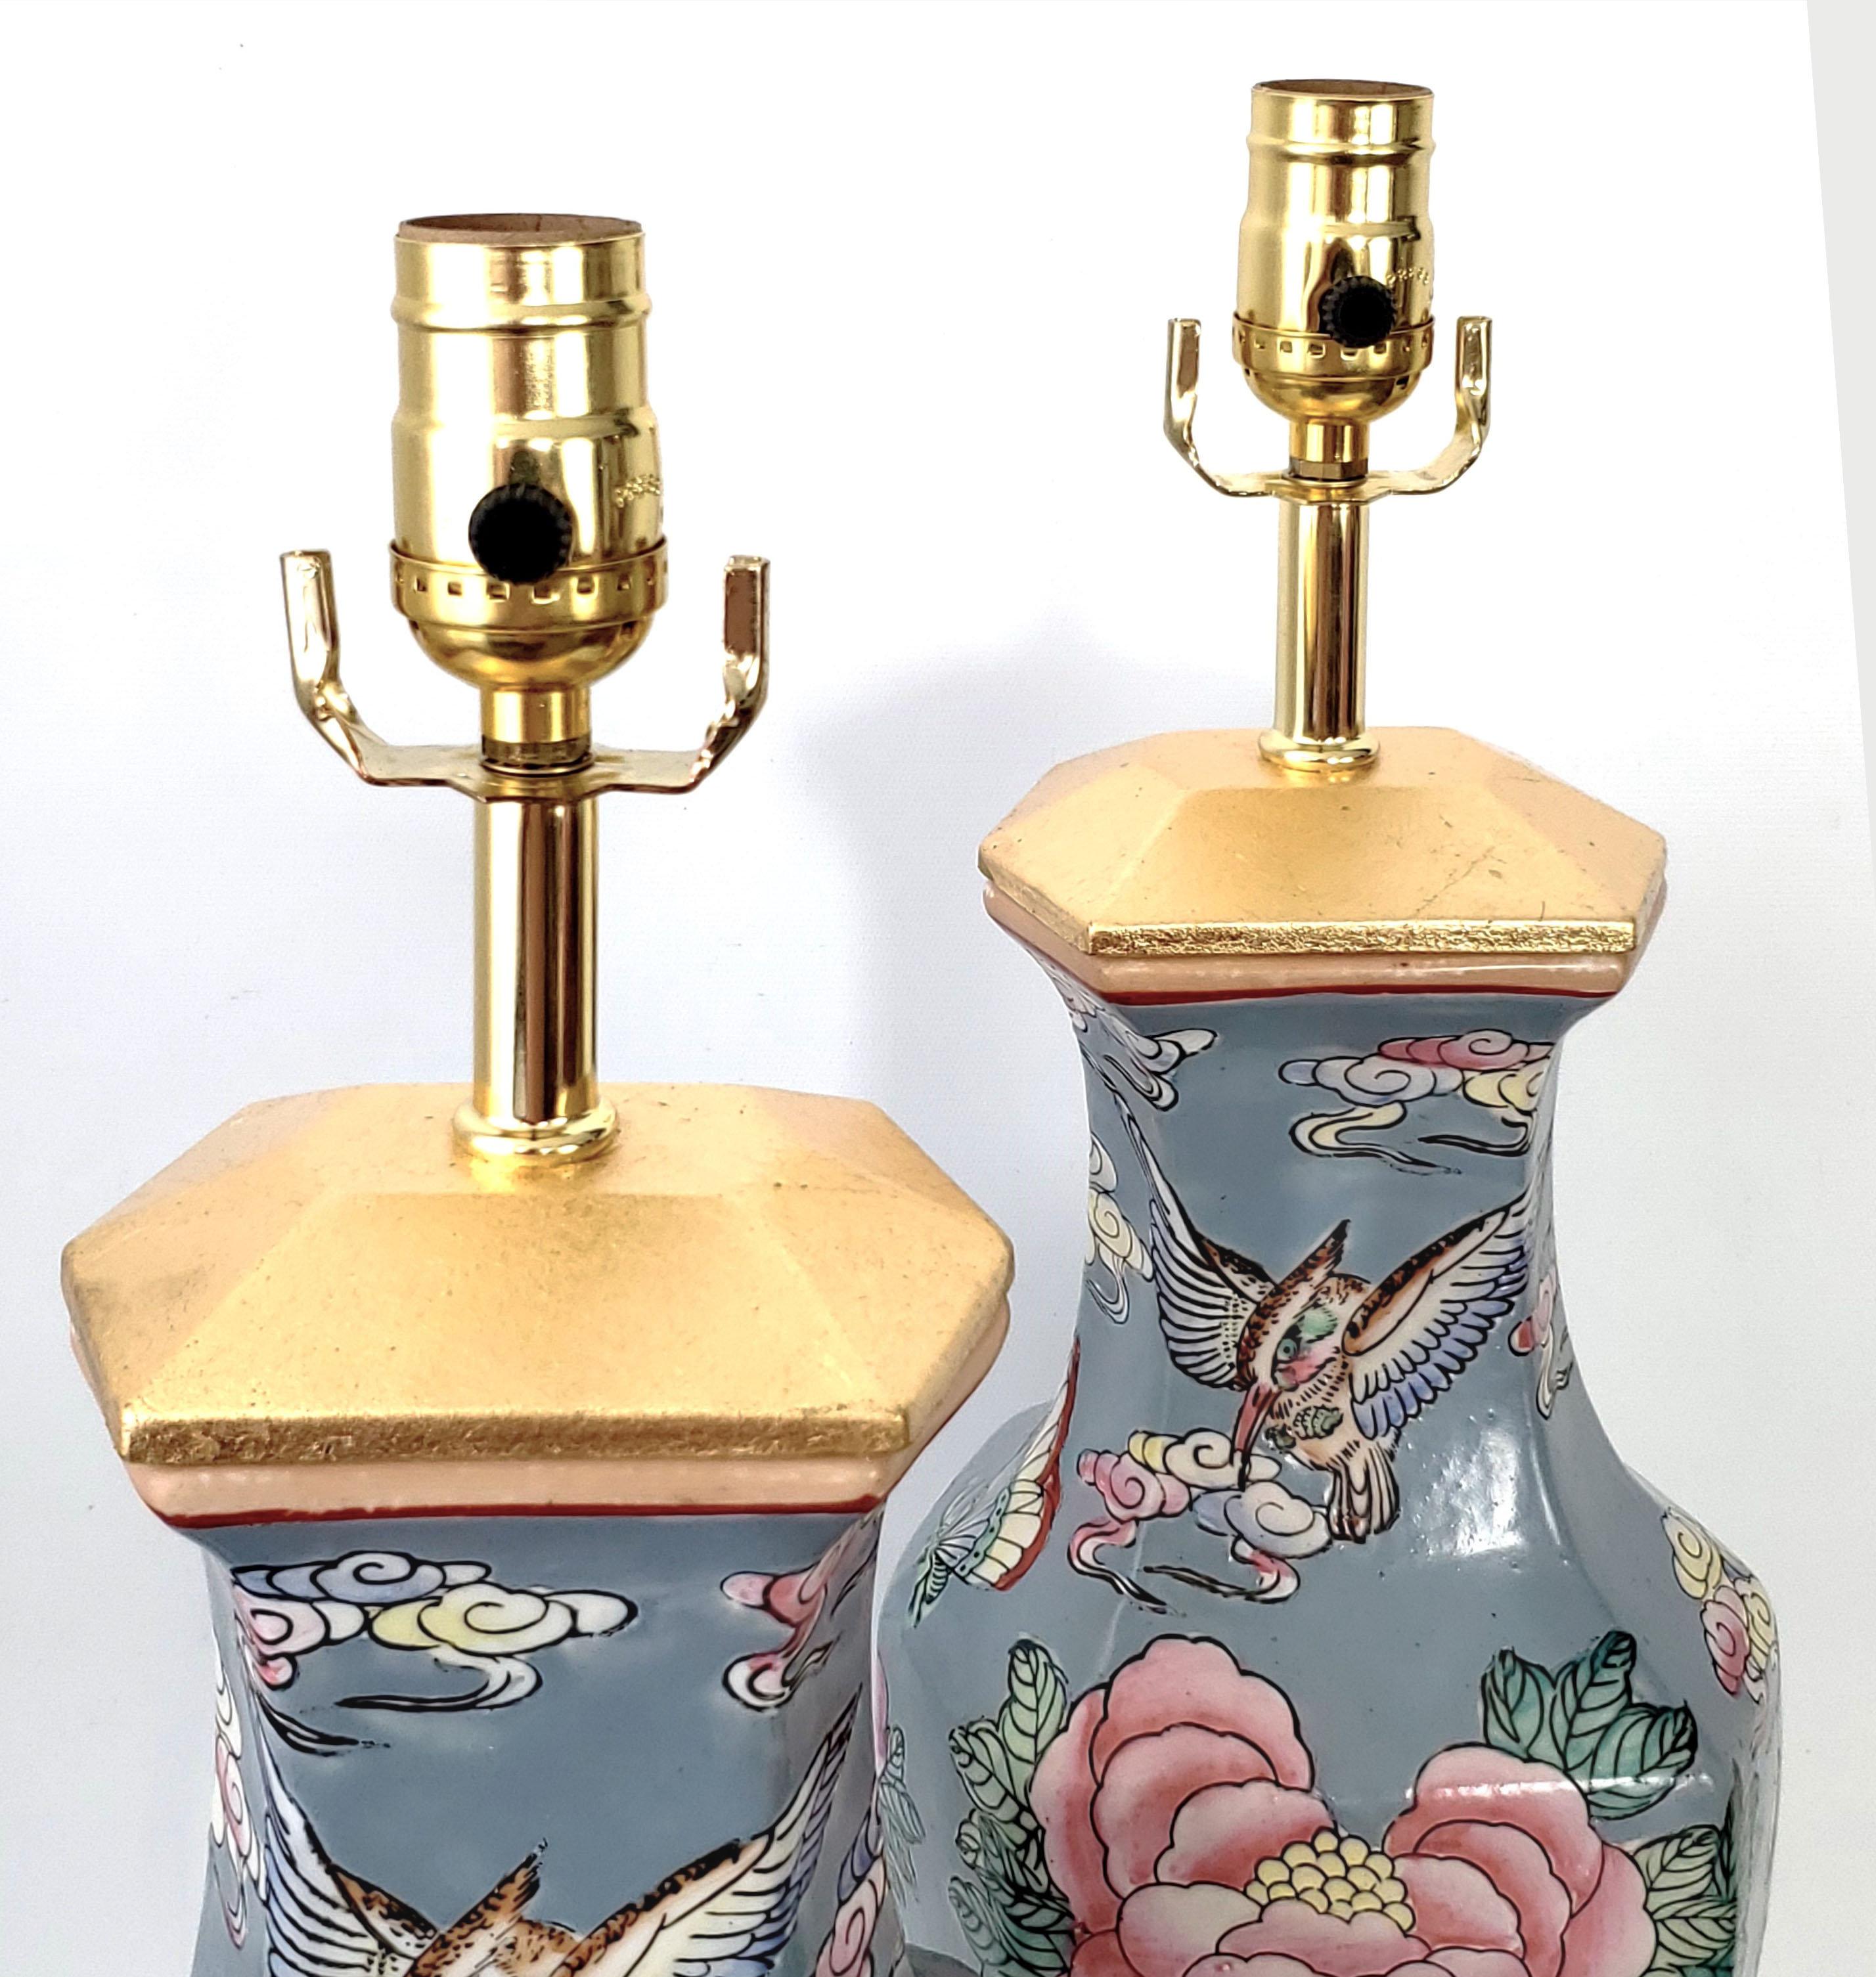 Pair of Vintage Chinese Porcelain Ceramic Table Lamps with Pink Lamp Shades For Sale 4